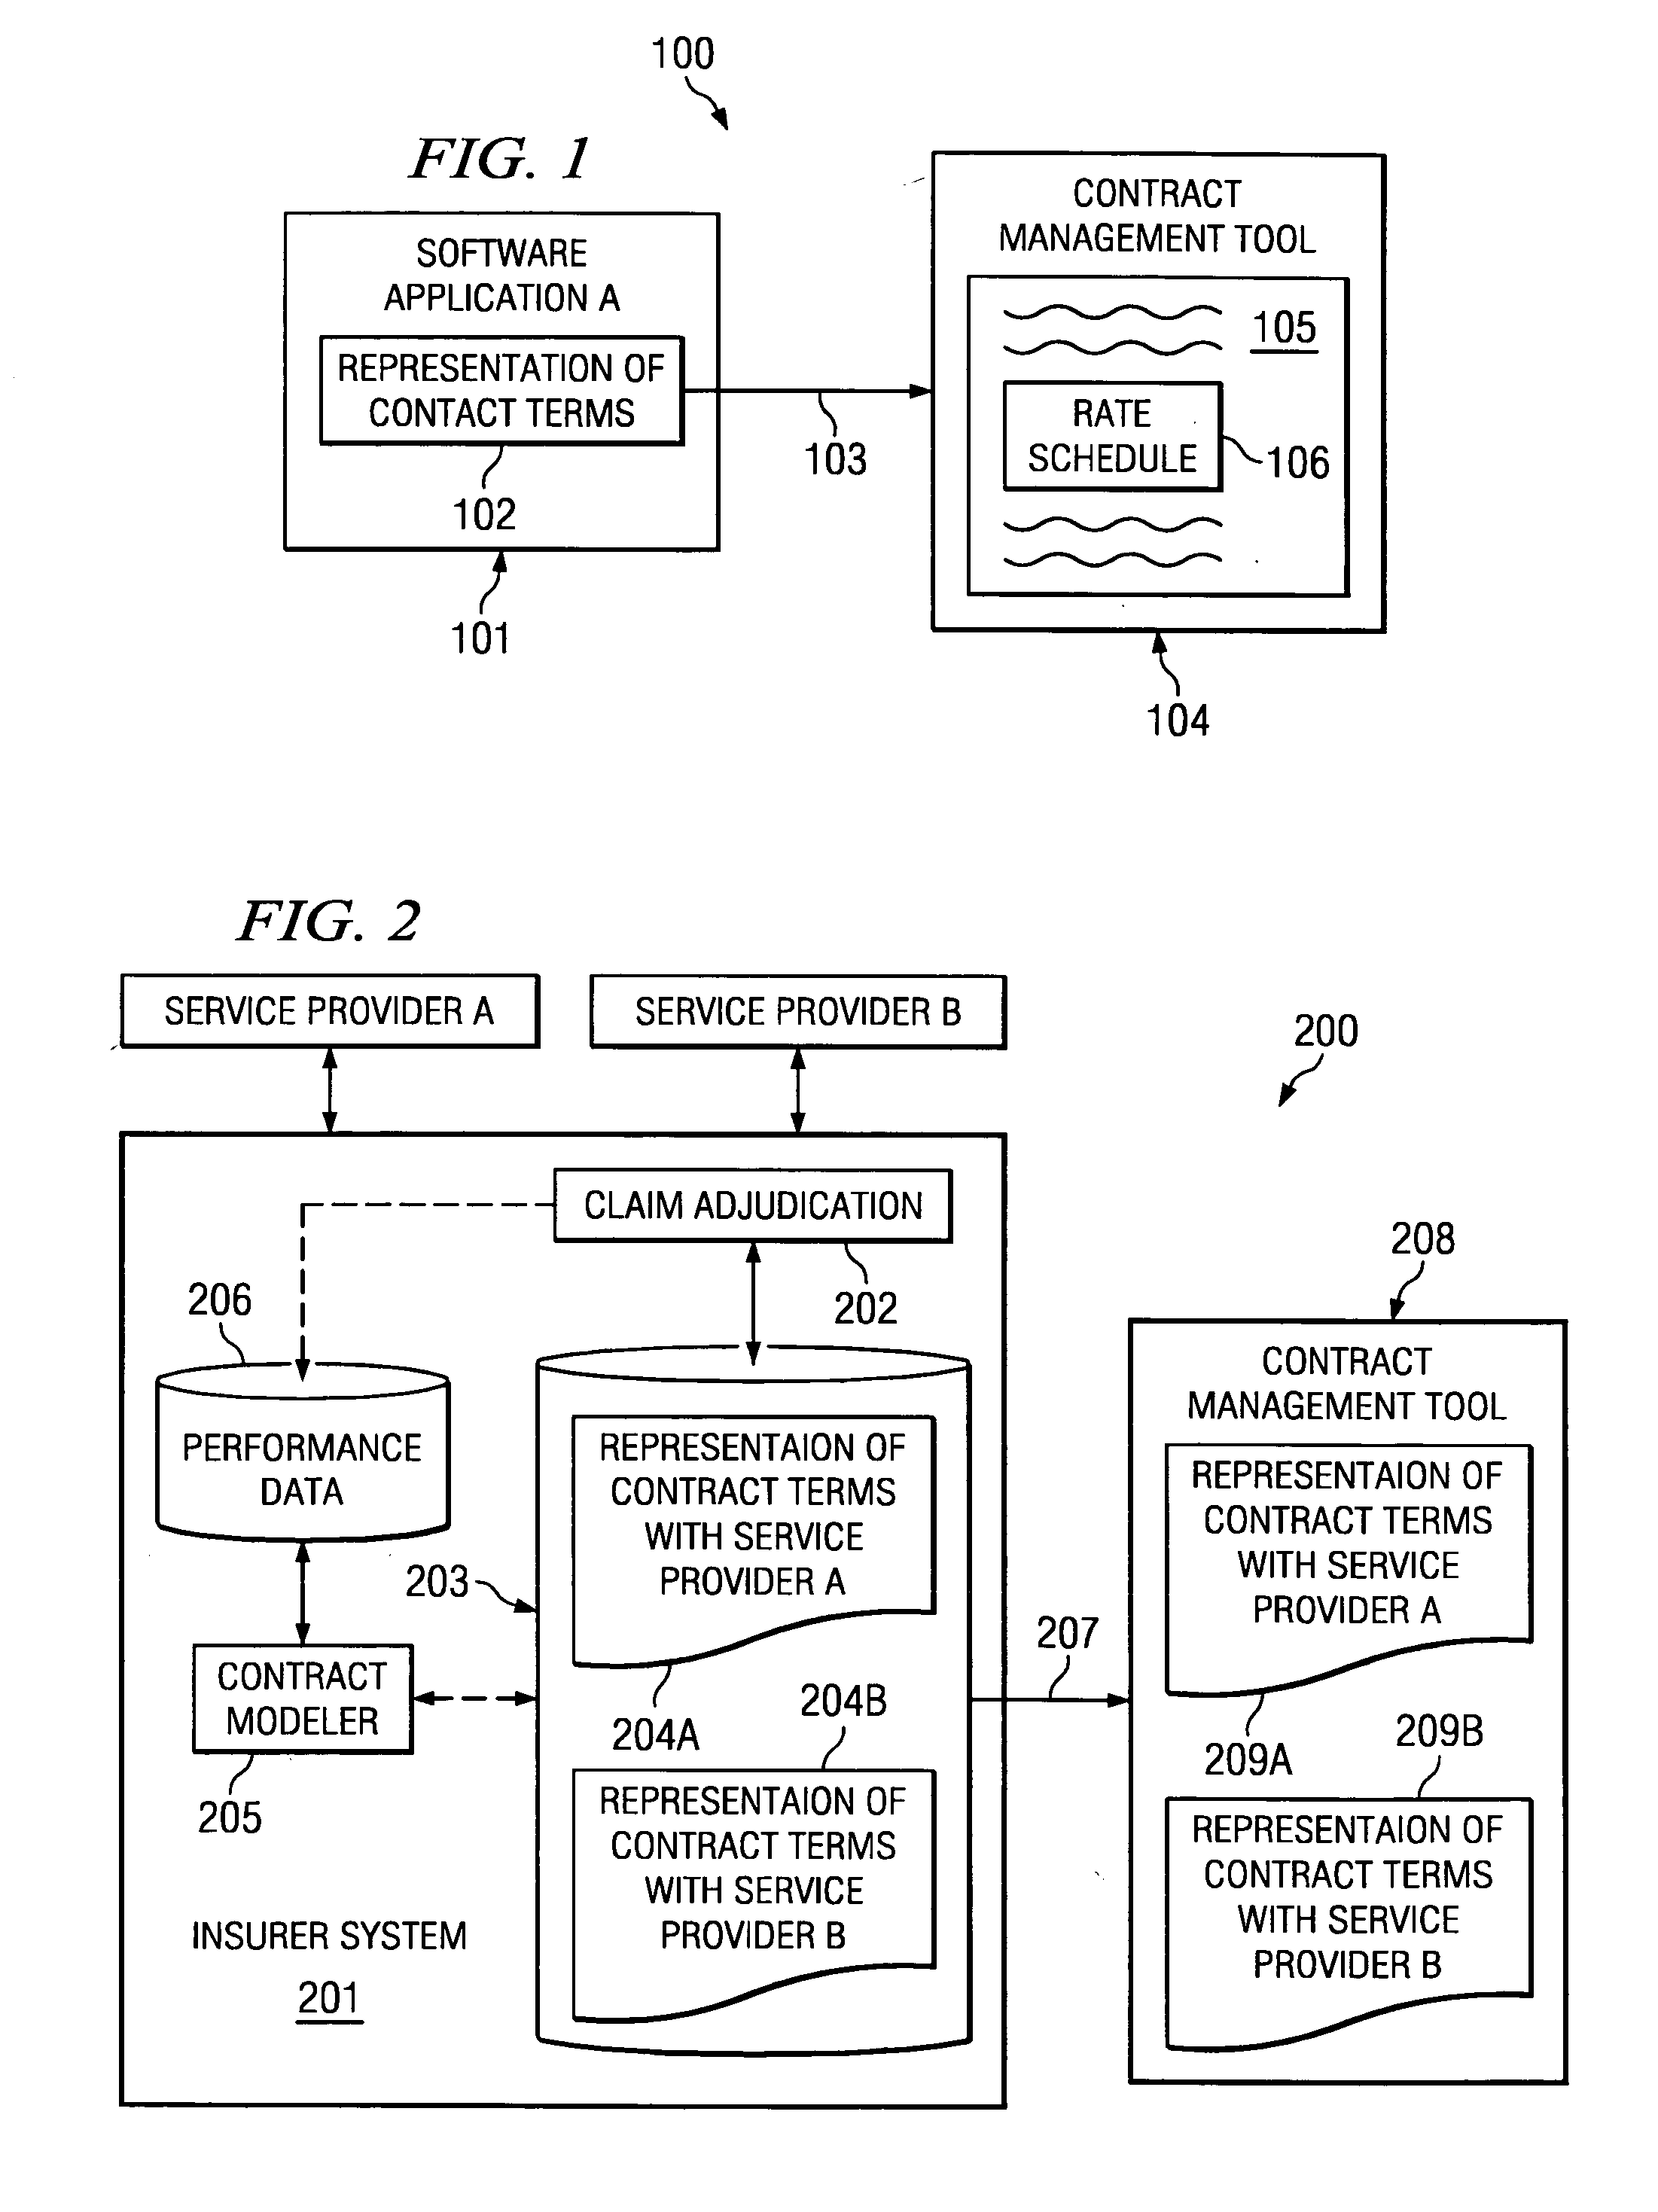 System and method for using a first electronic representation of contract terms for generating a second electronic representation of the contract terms